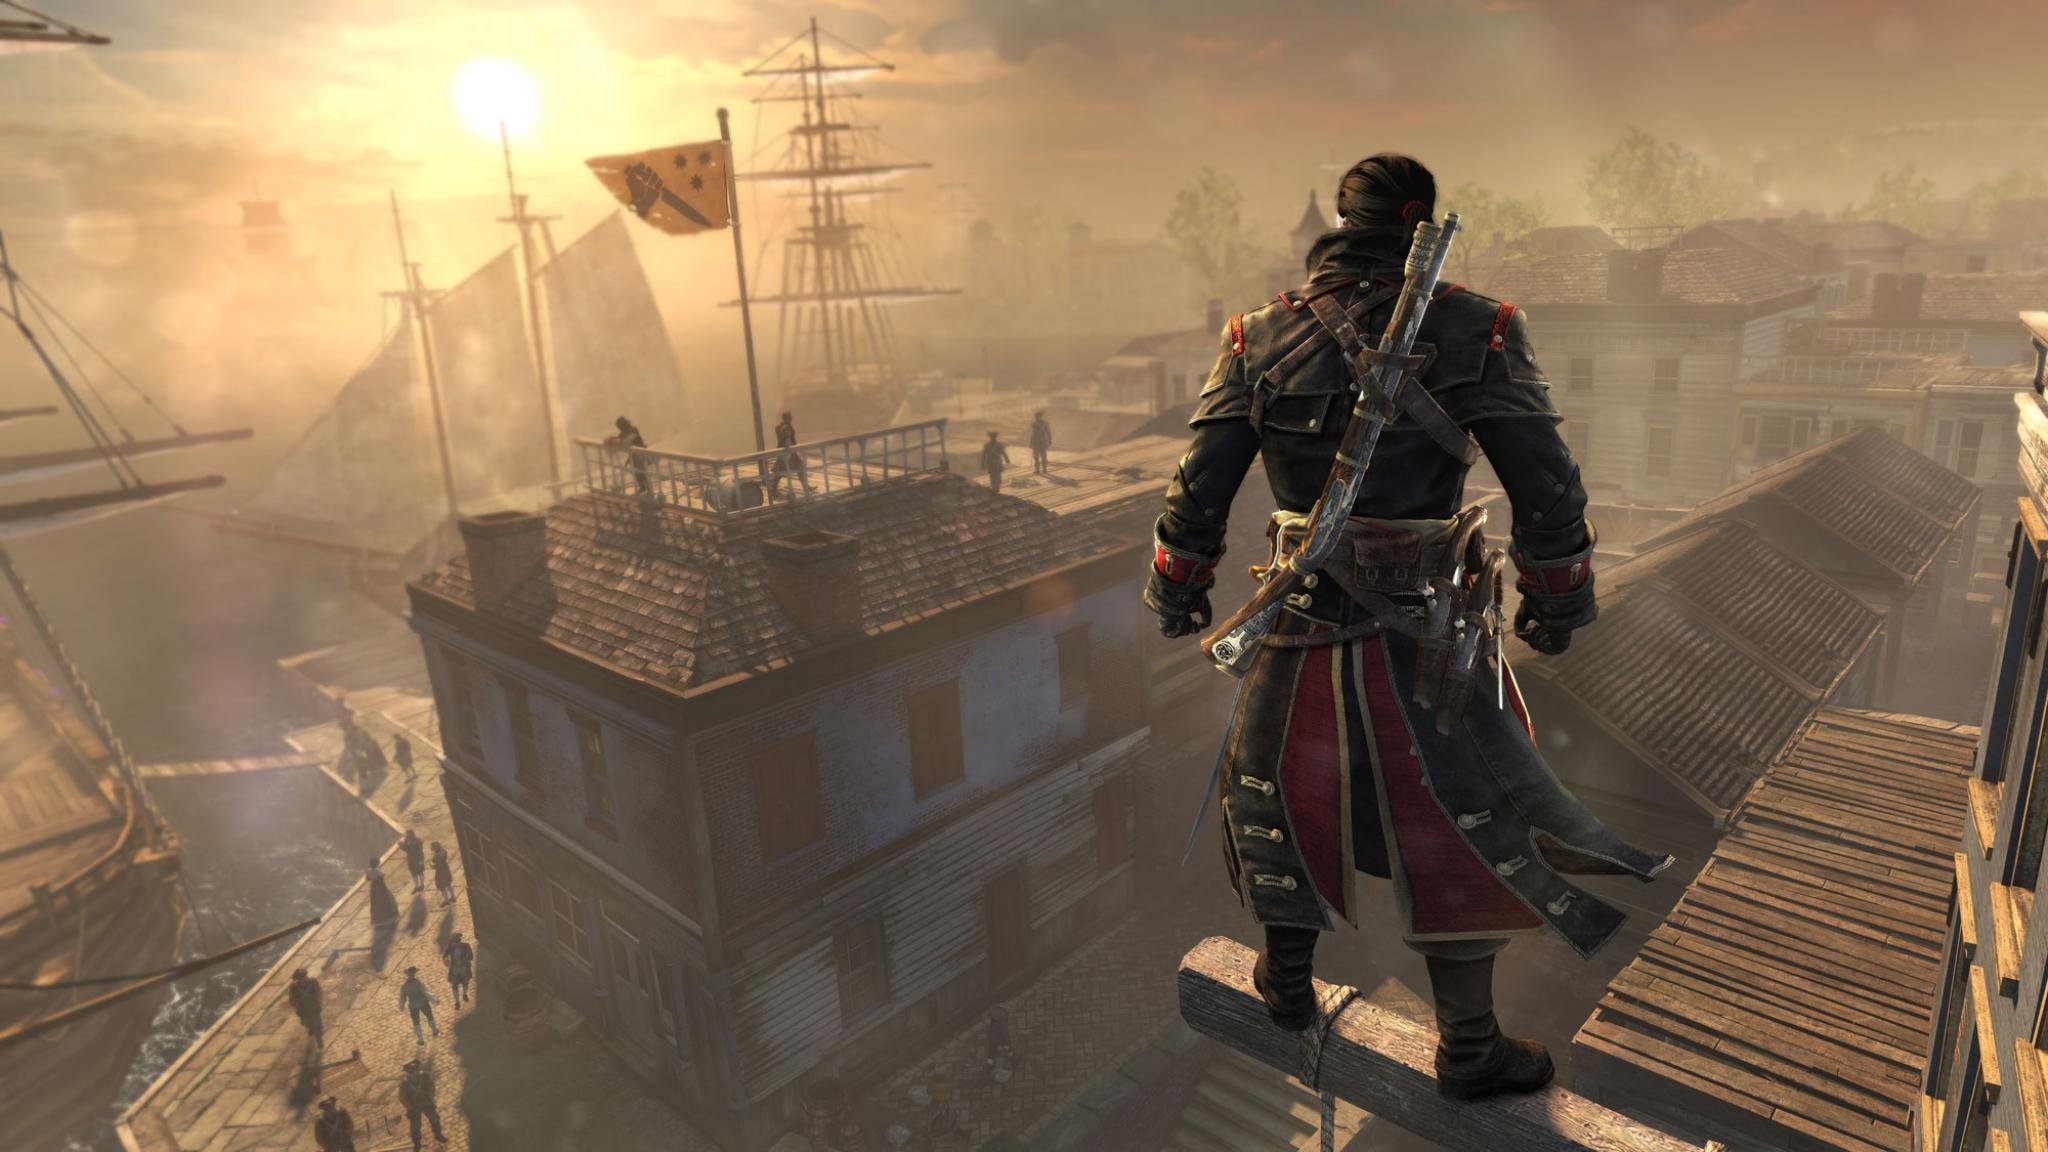 Awesome Assassin's Creed: Rogue free wallpaper ID:231496 for hd 2048x1152 desktop